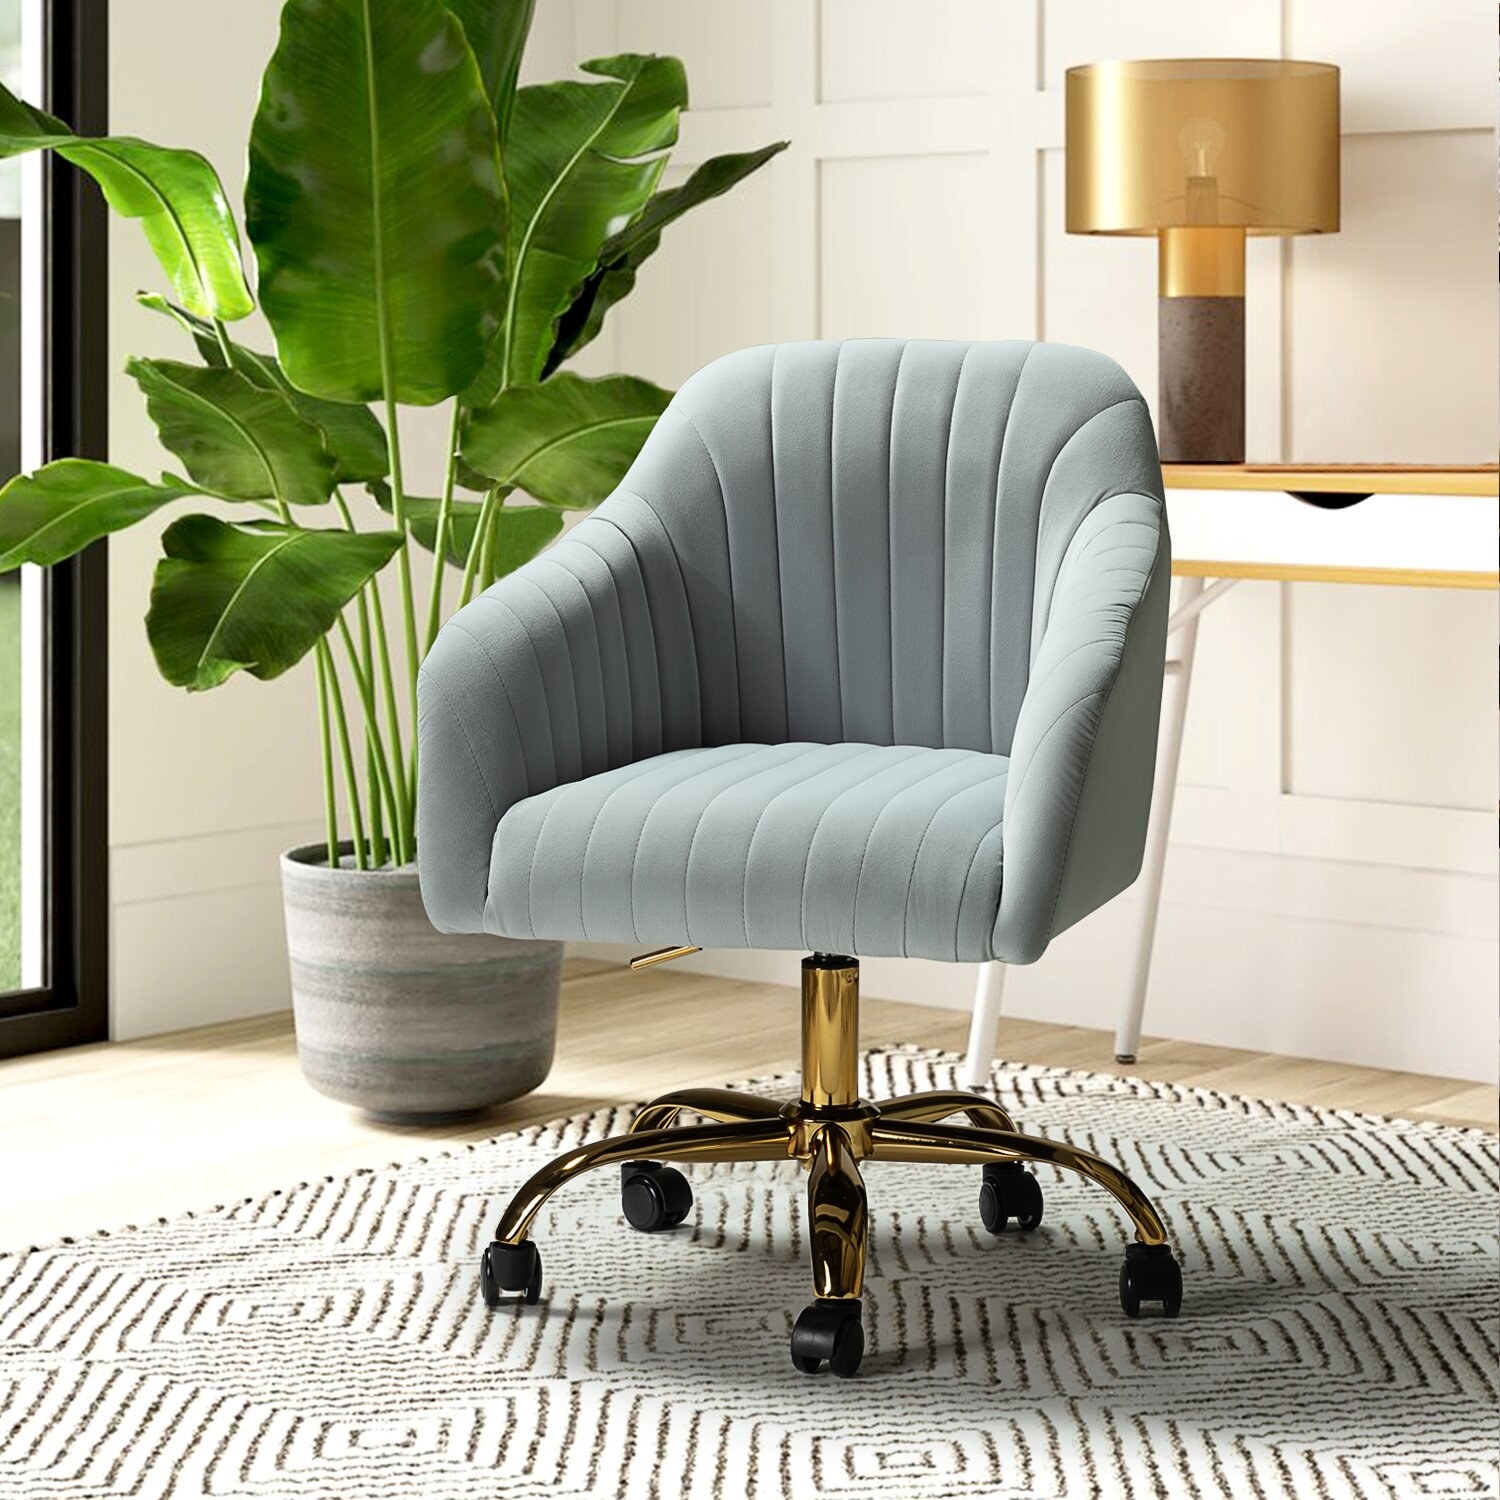 the upholstered chair in grey